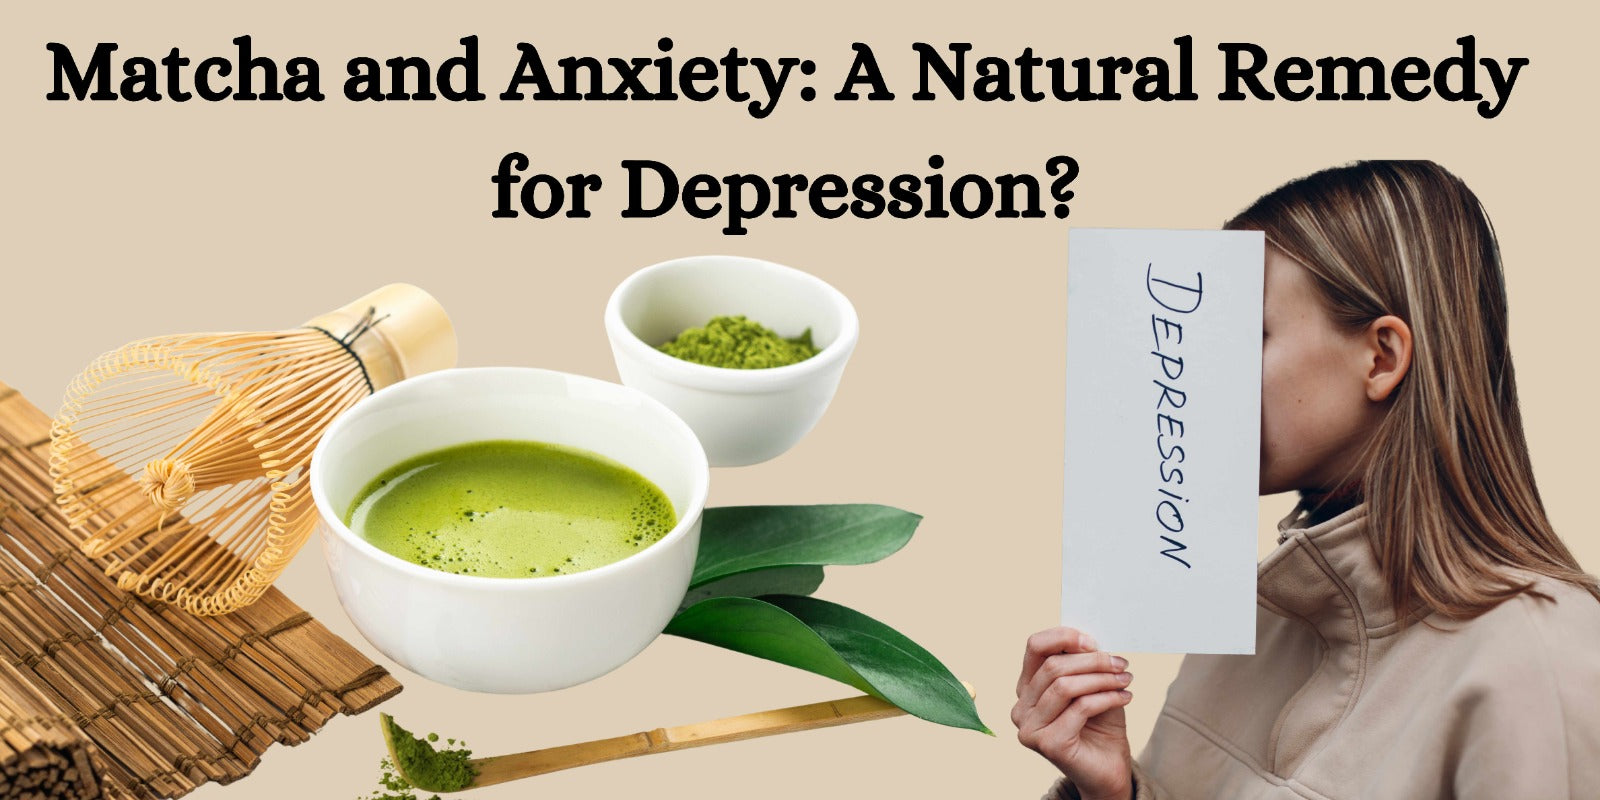 Matcha and Anxiety: A Natural Remedy for Depression?